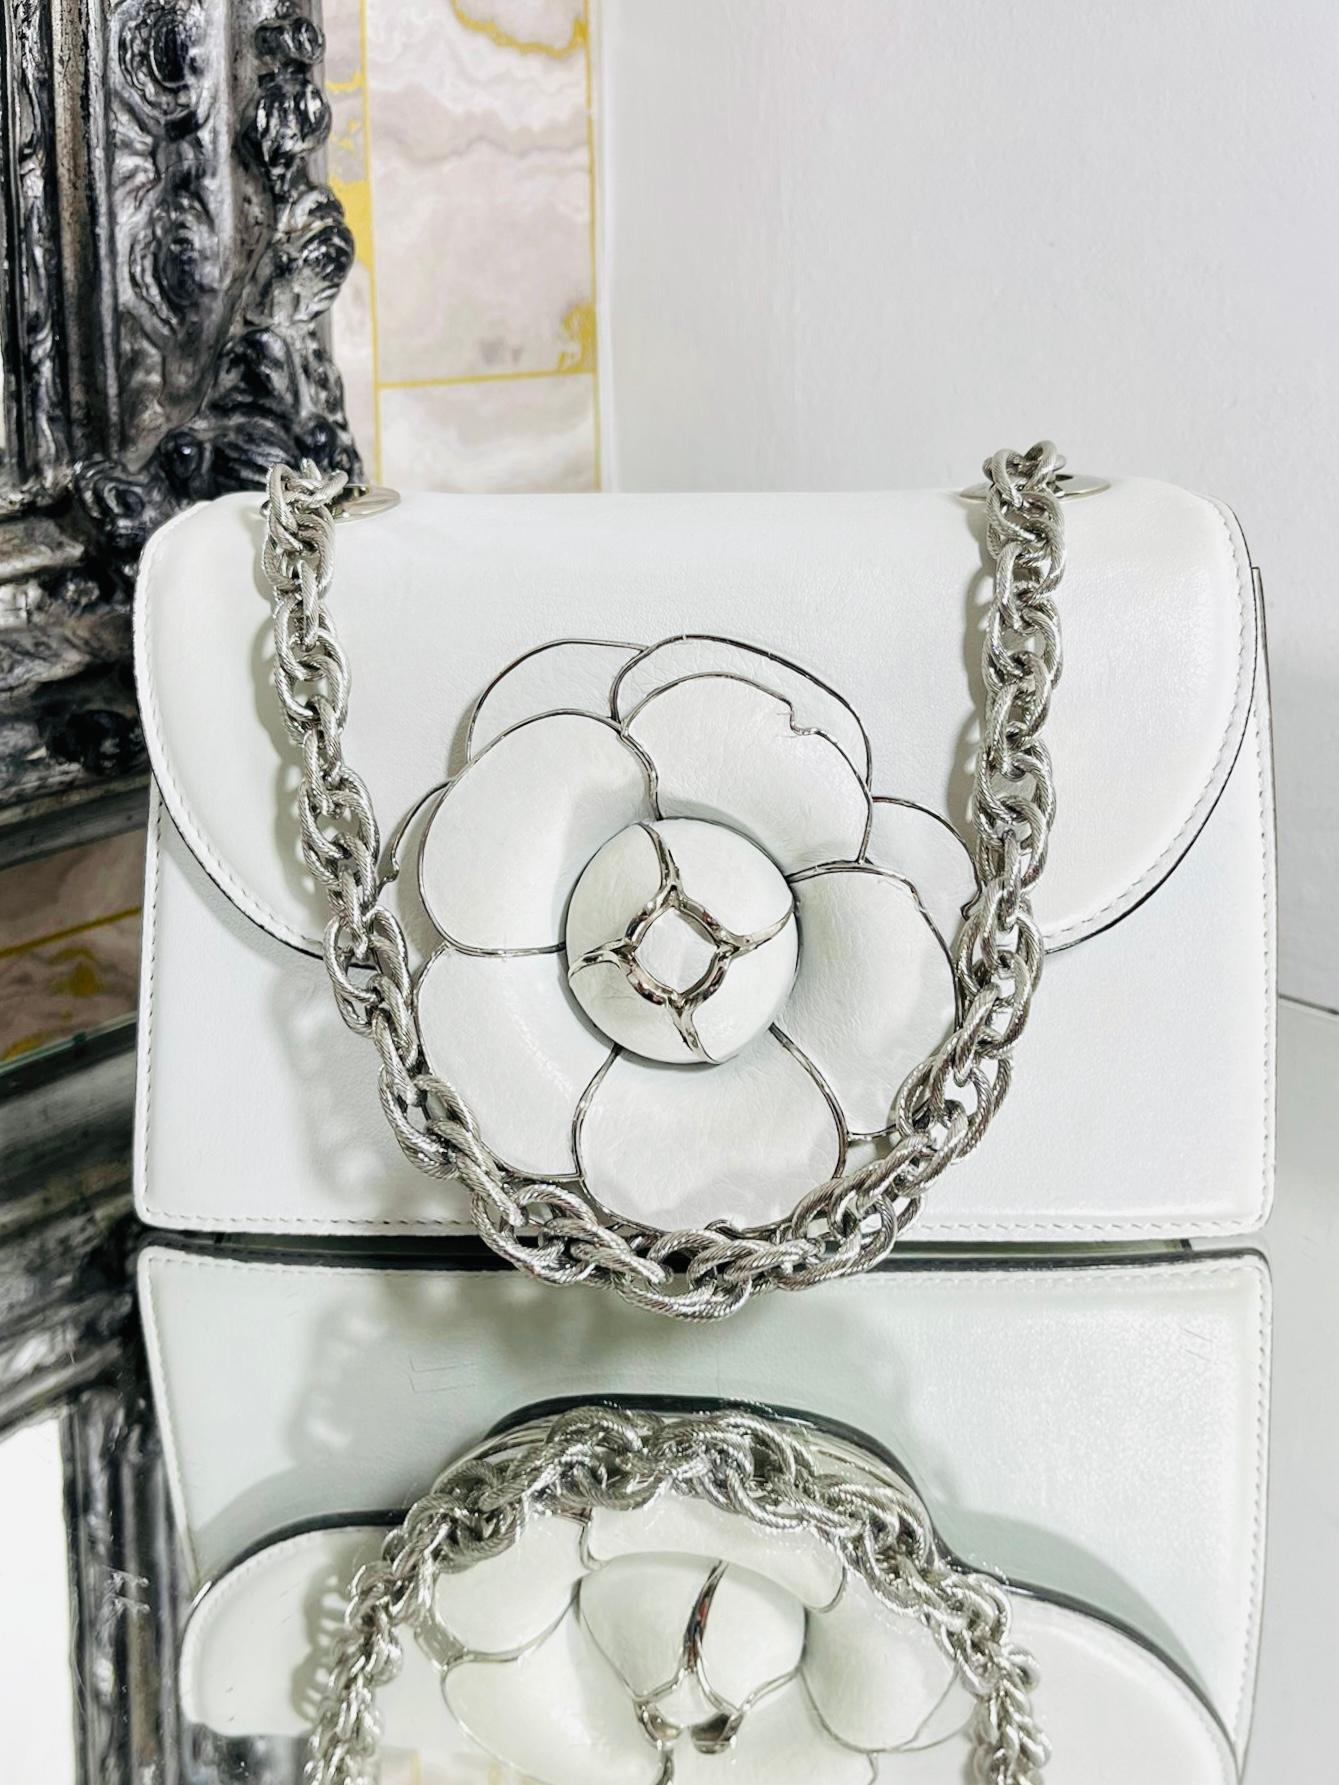 Oscar De La Renta Leather Gardenia Flower Bag

White leather with silver metal trim and a 3D Gardenia flower to the front

which is also edged in metal and a fancy silver, removable shoulder strap.

Size - Height 12cm, Width 21cm, Depth